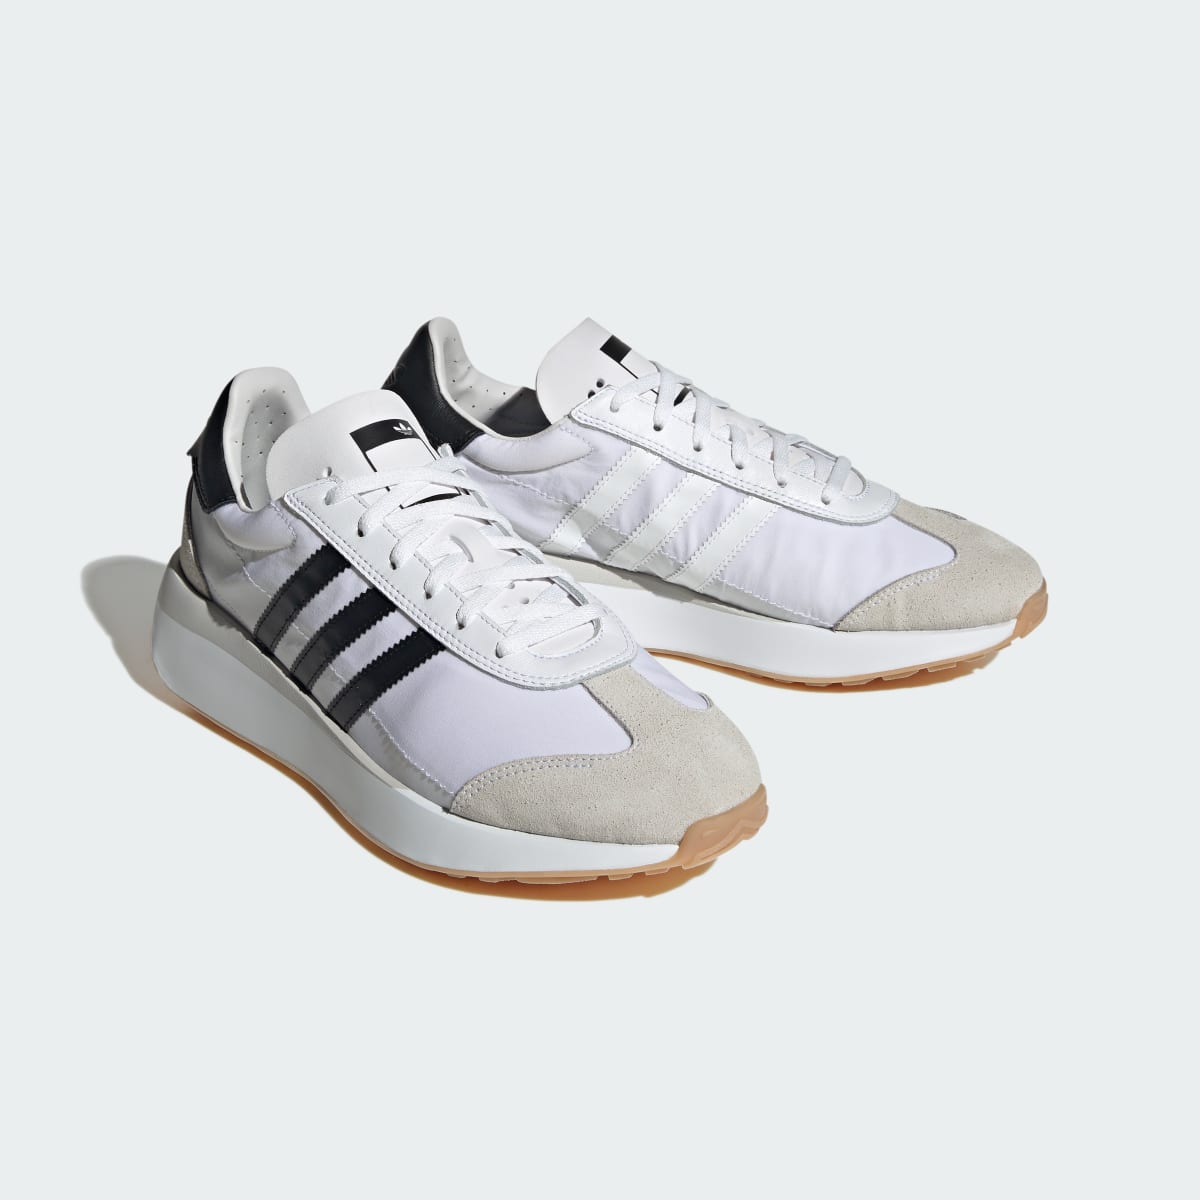 Adidas Scarpe Country XLG. 5